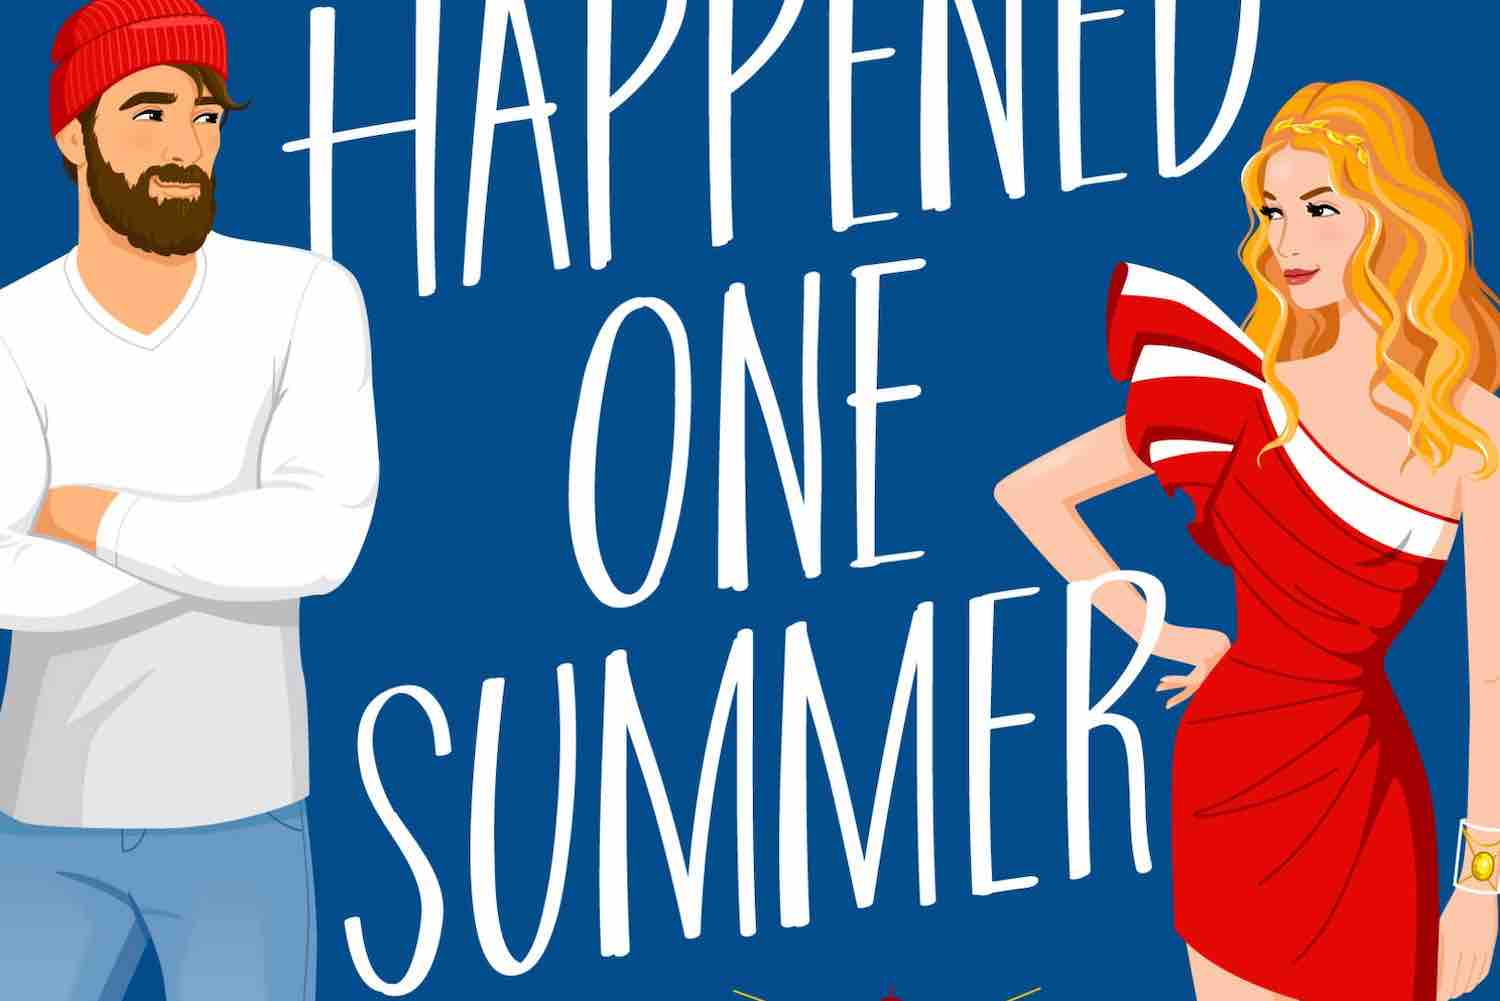 It Happened One Summer - But Why Tho?